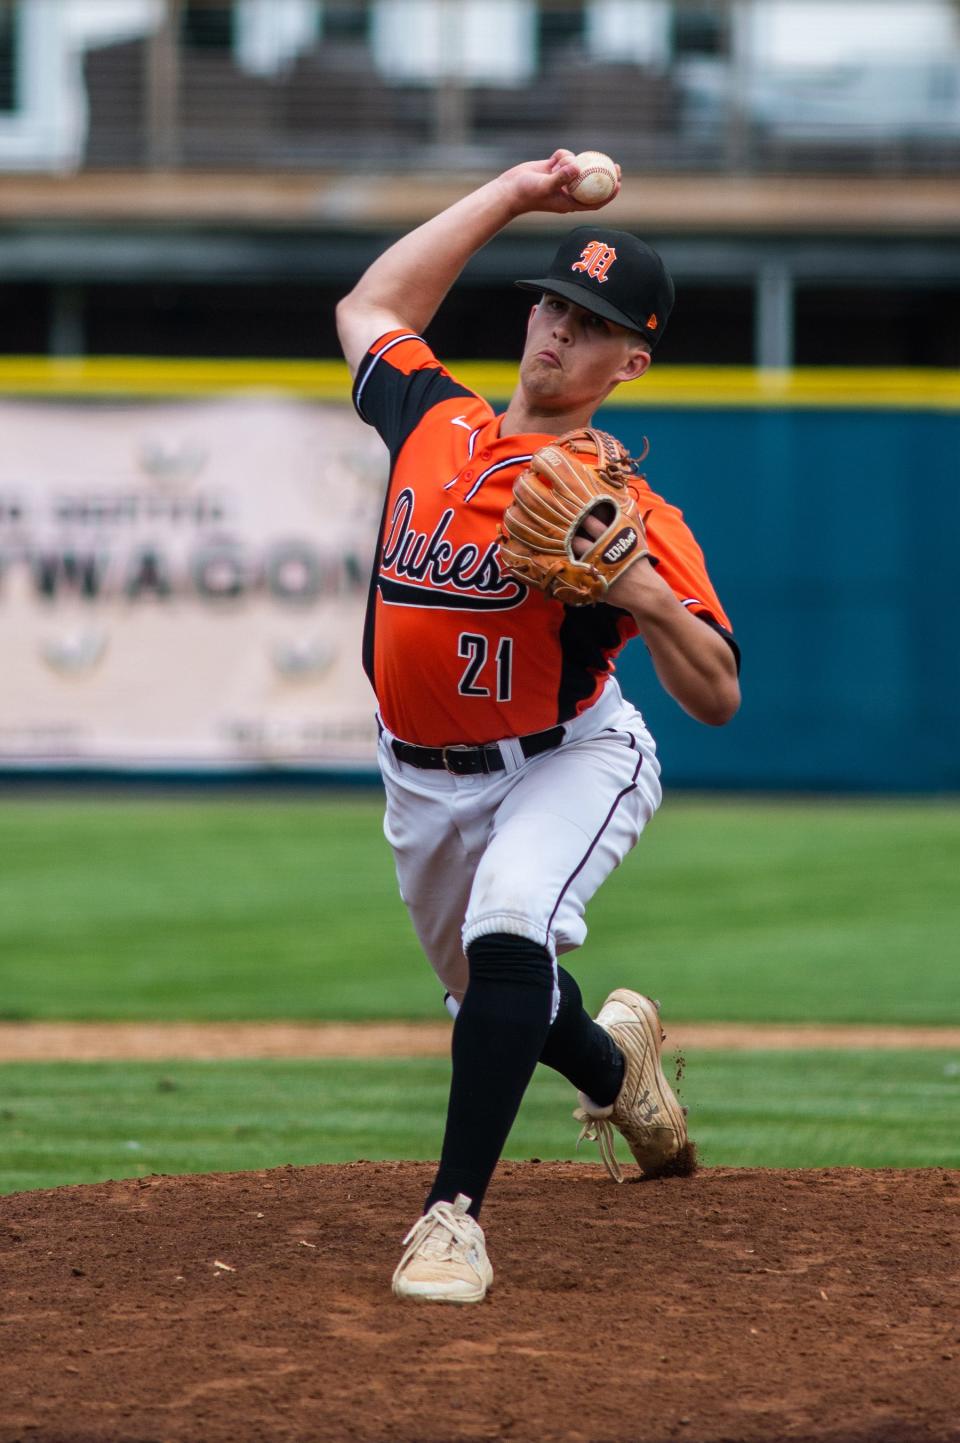 Marlboro's Owen Schlagler delivers a pitch during the Section 9 Class B baseball final at Cantine Field in Saugerties, NY on Sunday, May 29, 2022.